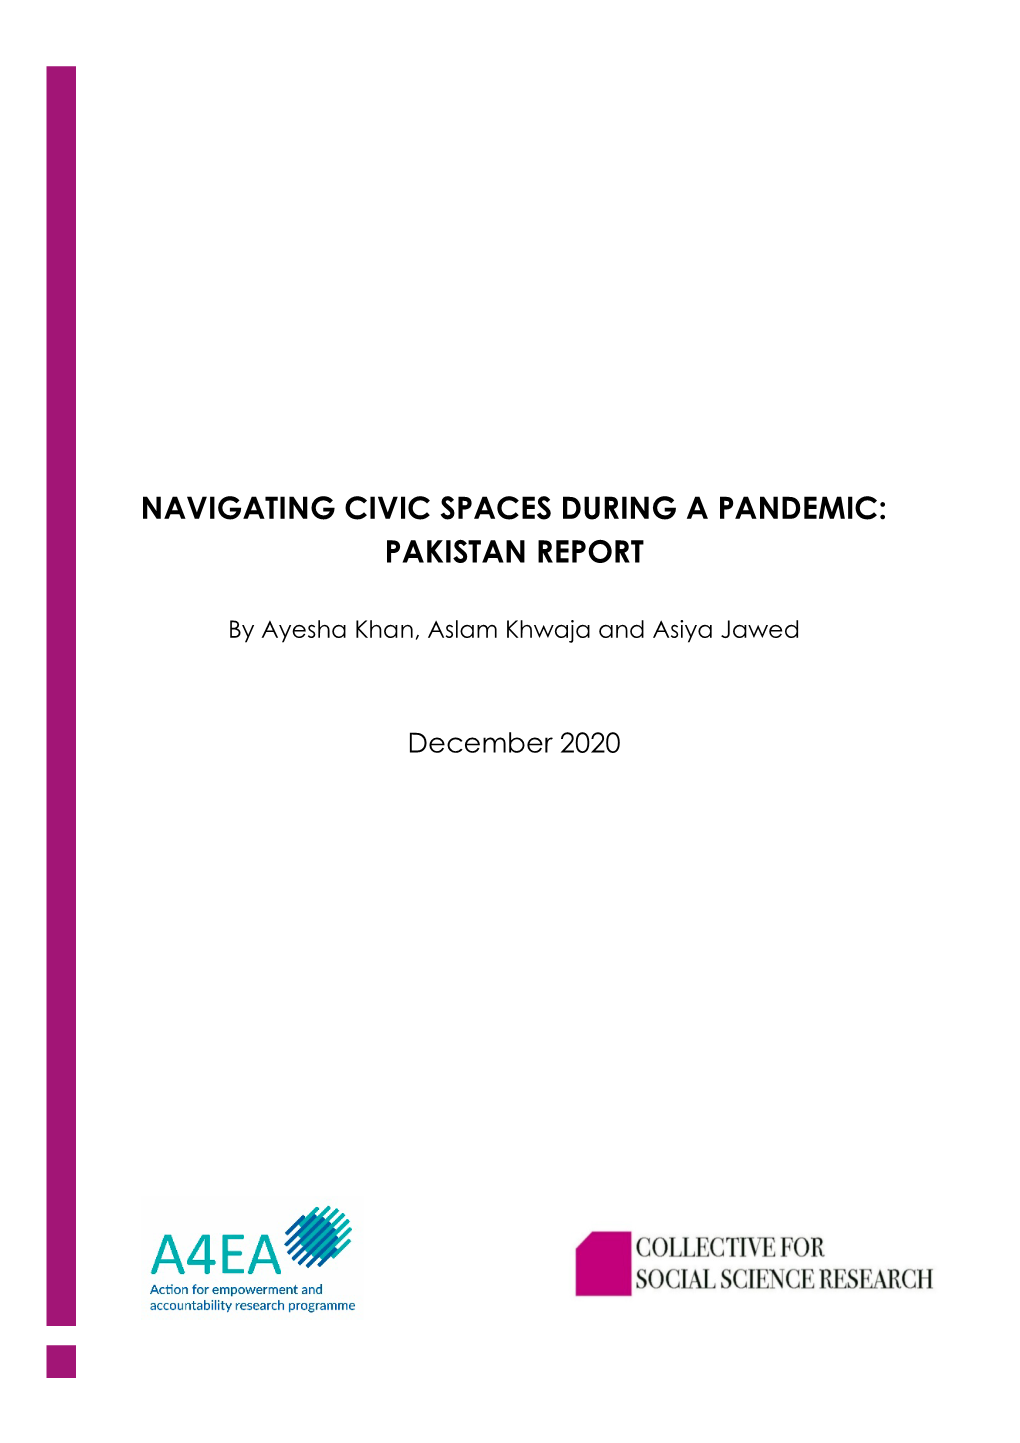 Navigating Civic Spaces During a Pandemic: Pakistan Report